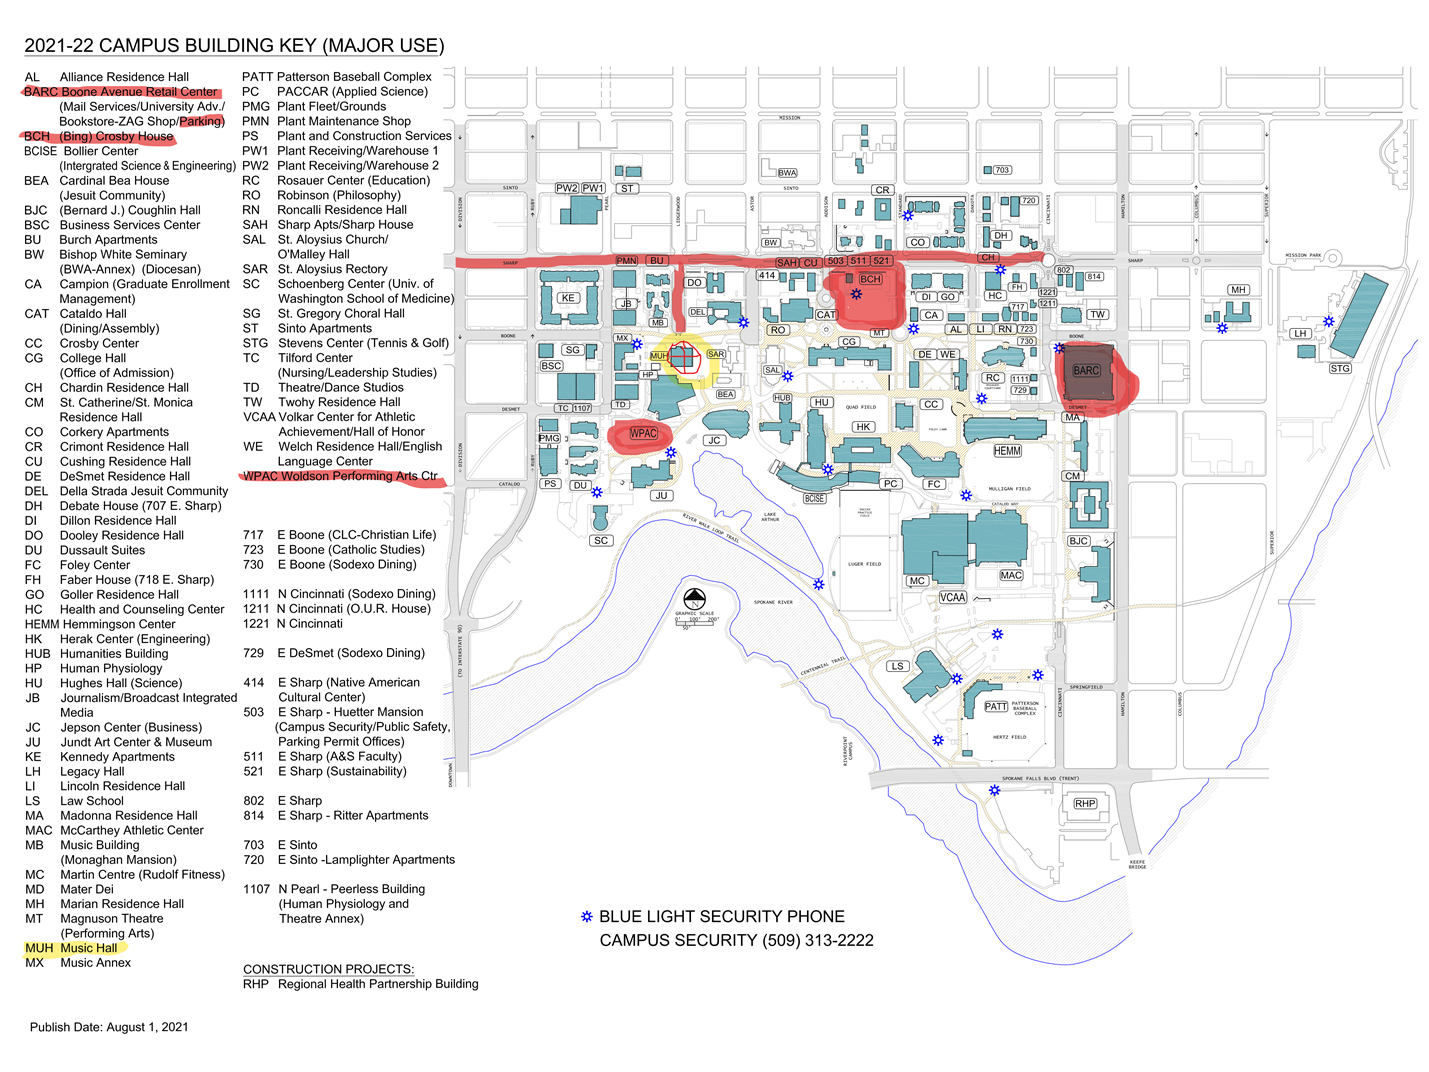 Red areas show suggested parking; Yellow = Music Hall